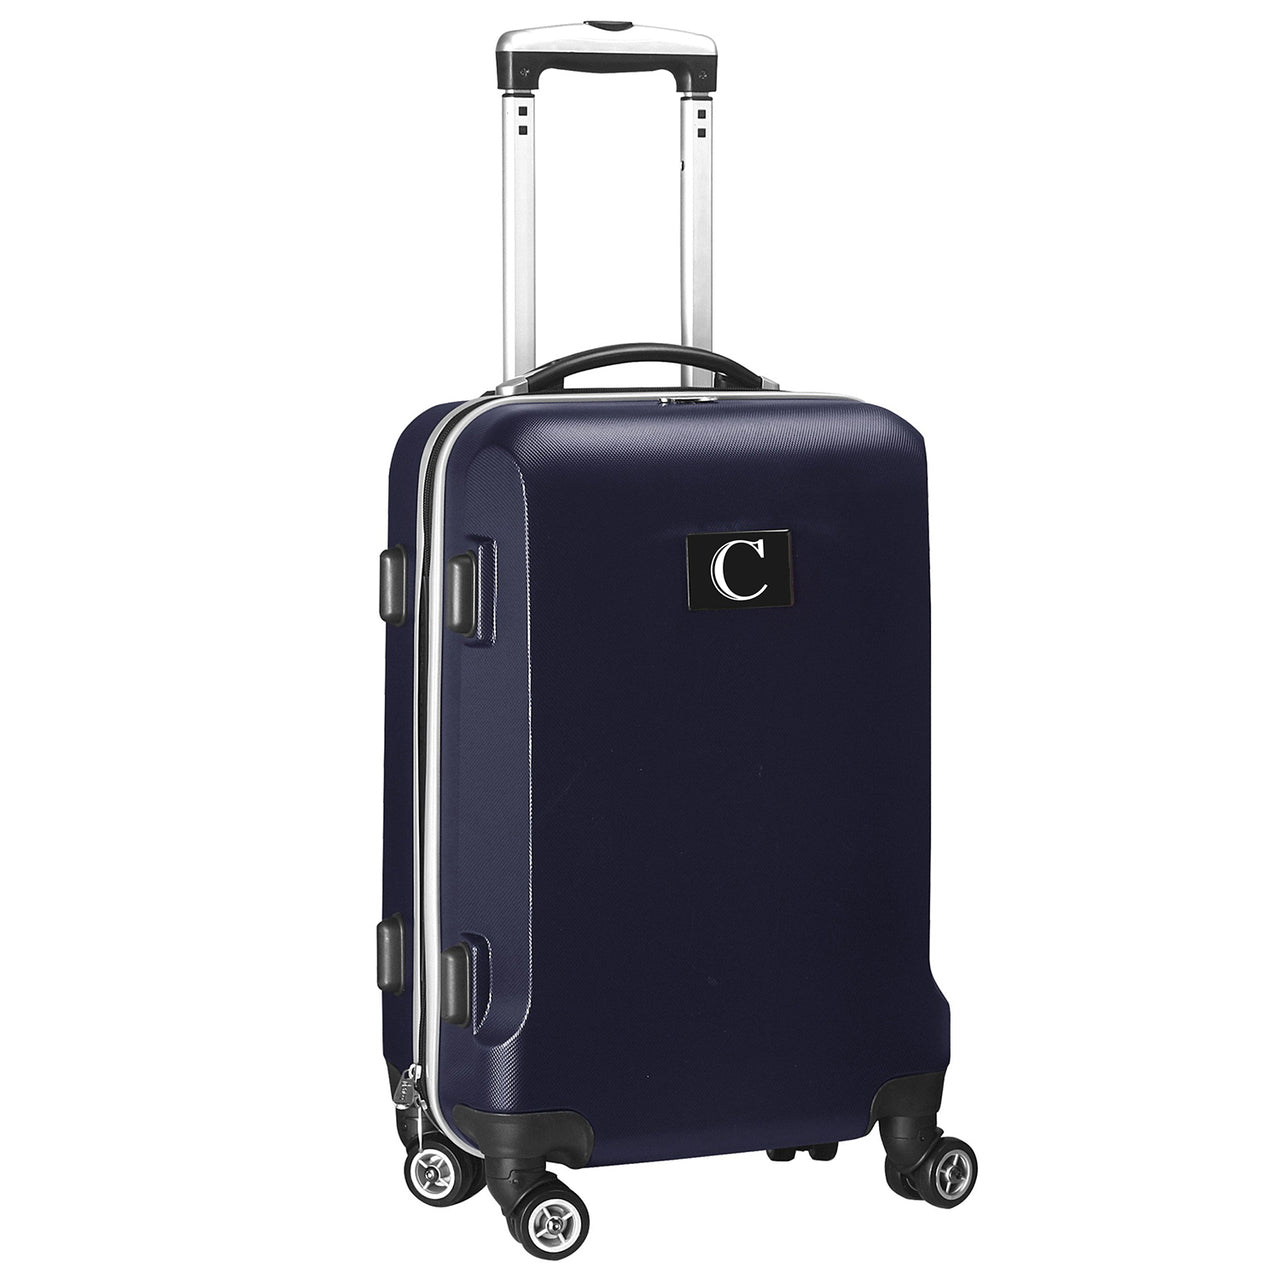 Personalized Initial Name letter "C" 20 inches Carry on Hardcase Spinner Luggage by Mojo  in NAVY